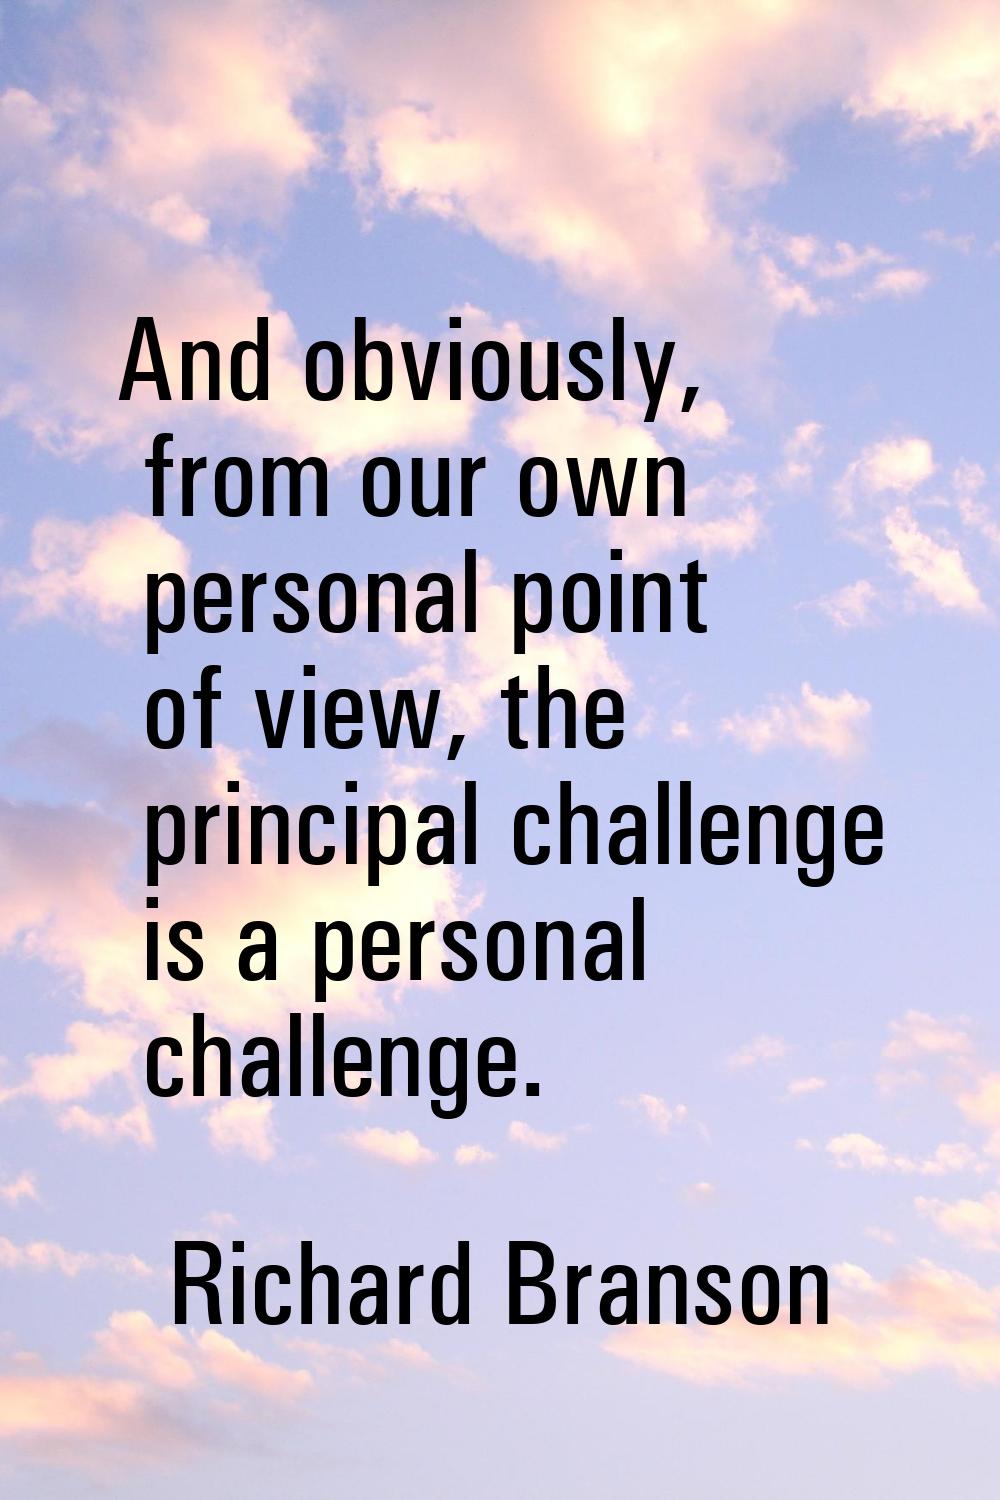 And obviously, from our own personal point of view, the principal challenge is a personal challenge